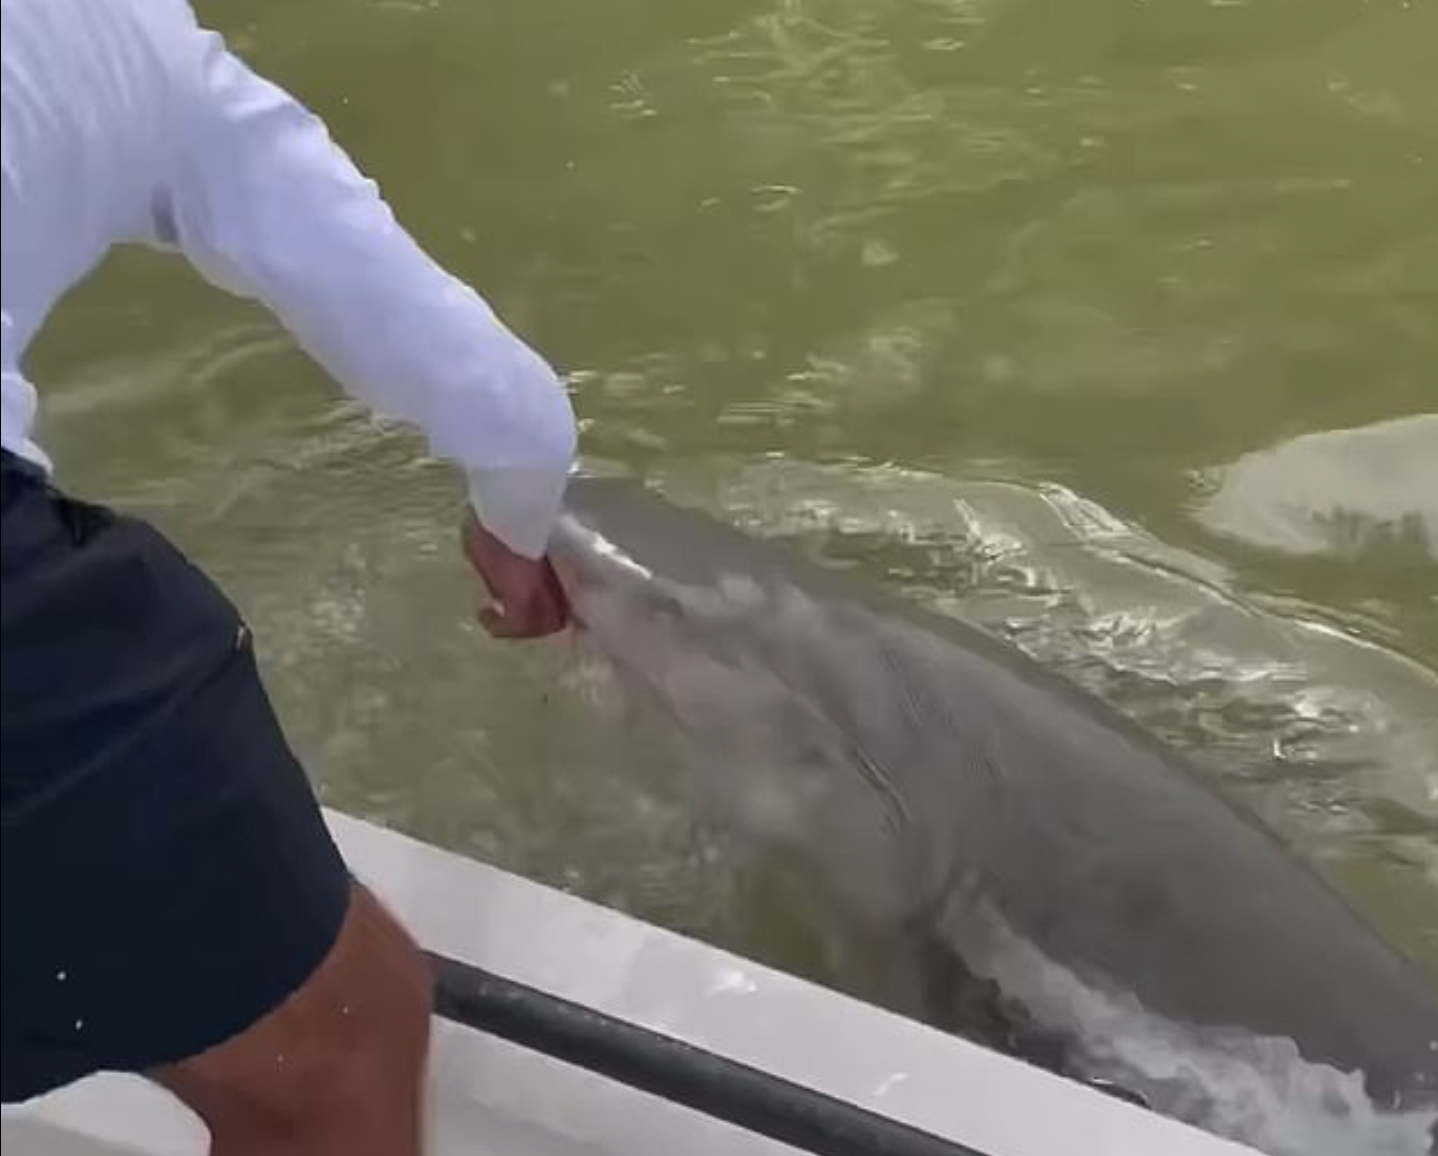 A shark latched onto the arm of a fisherman and pulled him into the water in the Everglades